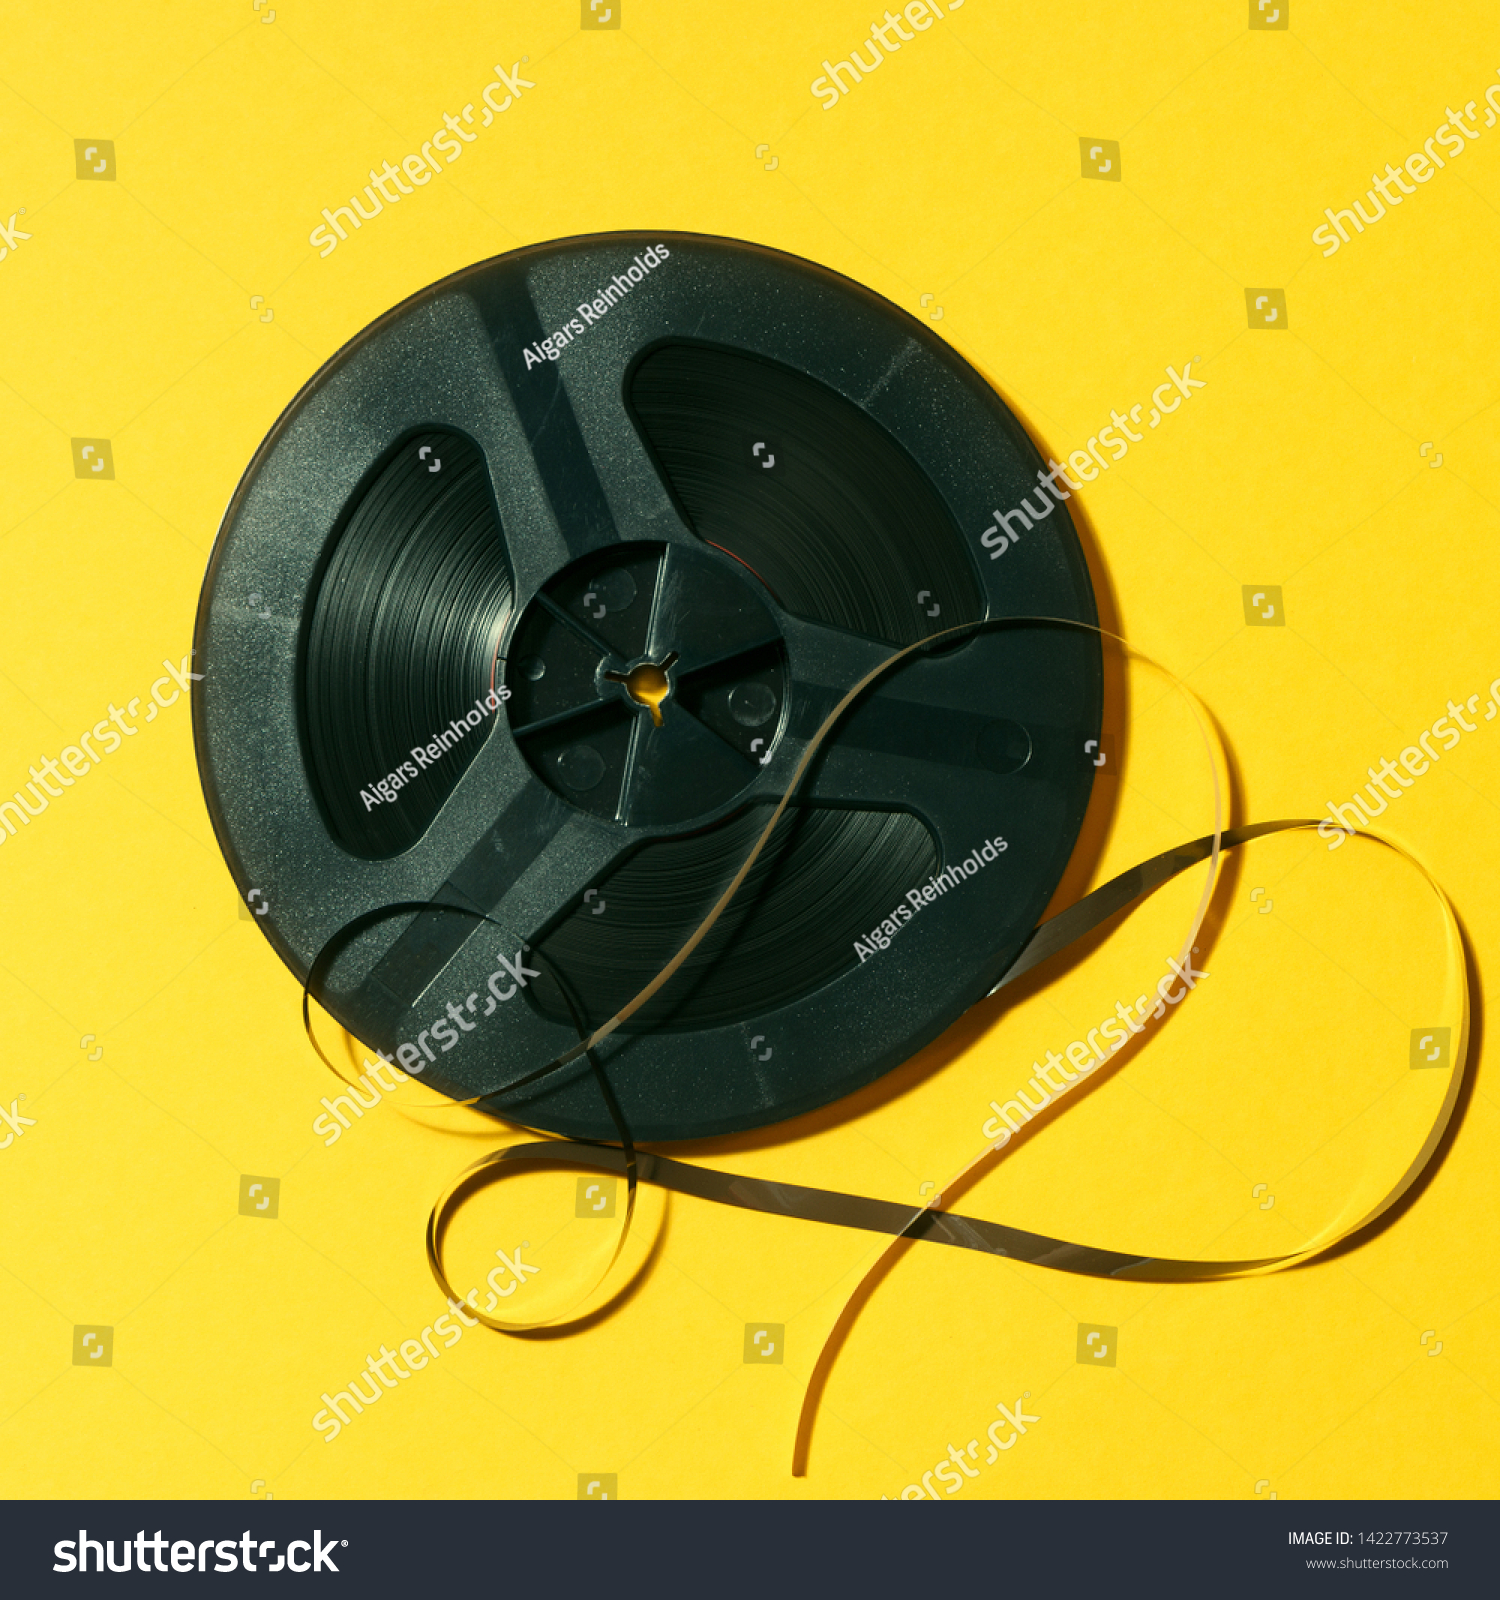 reel-to-reel tape in spool on a yellow background #1422773537